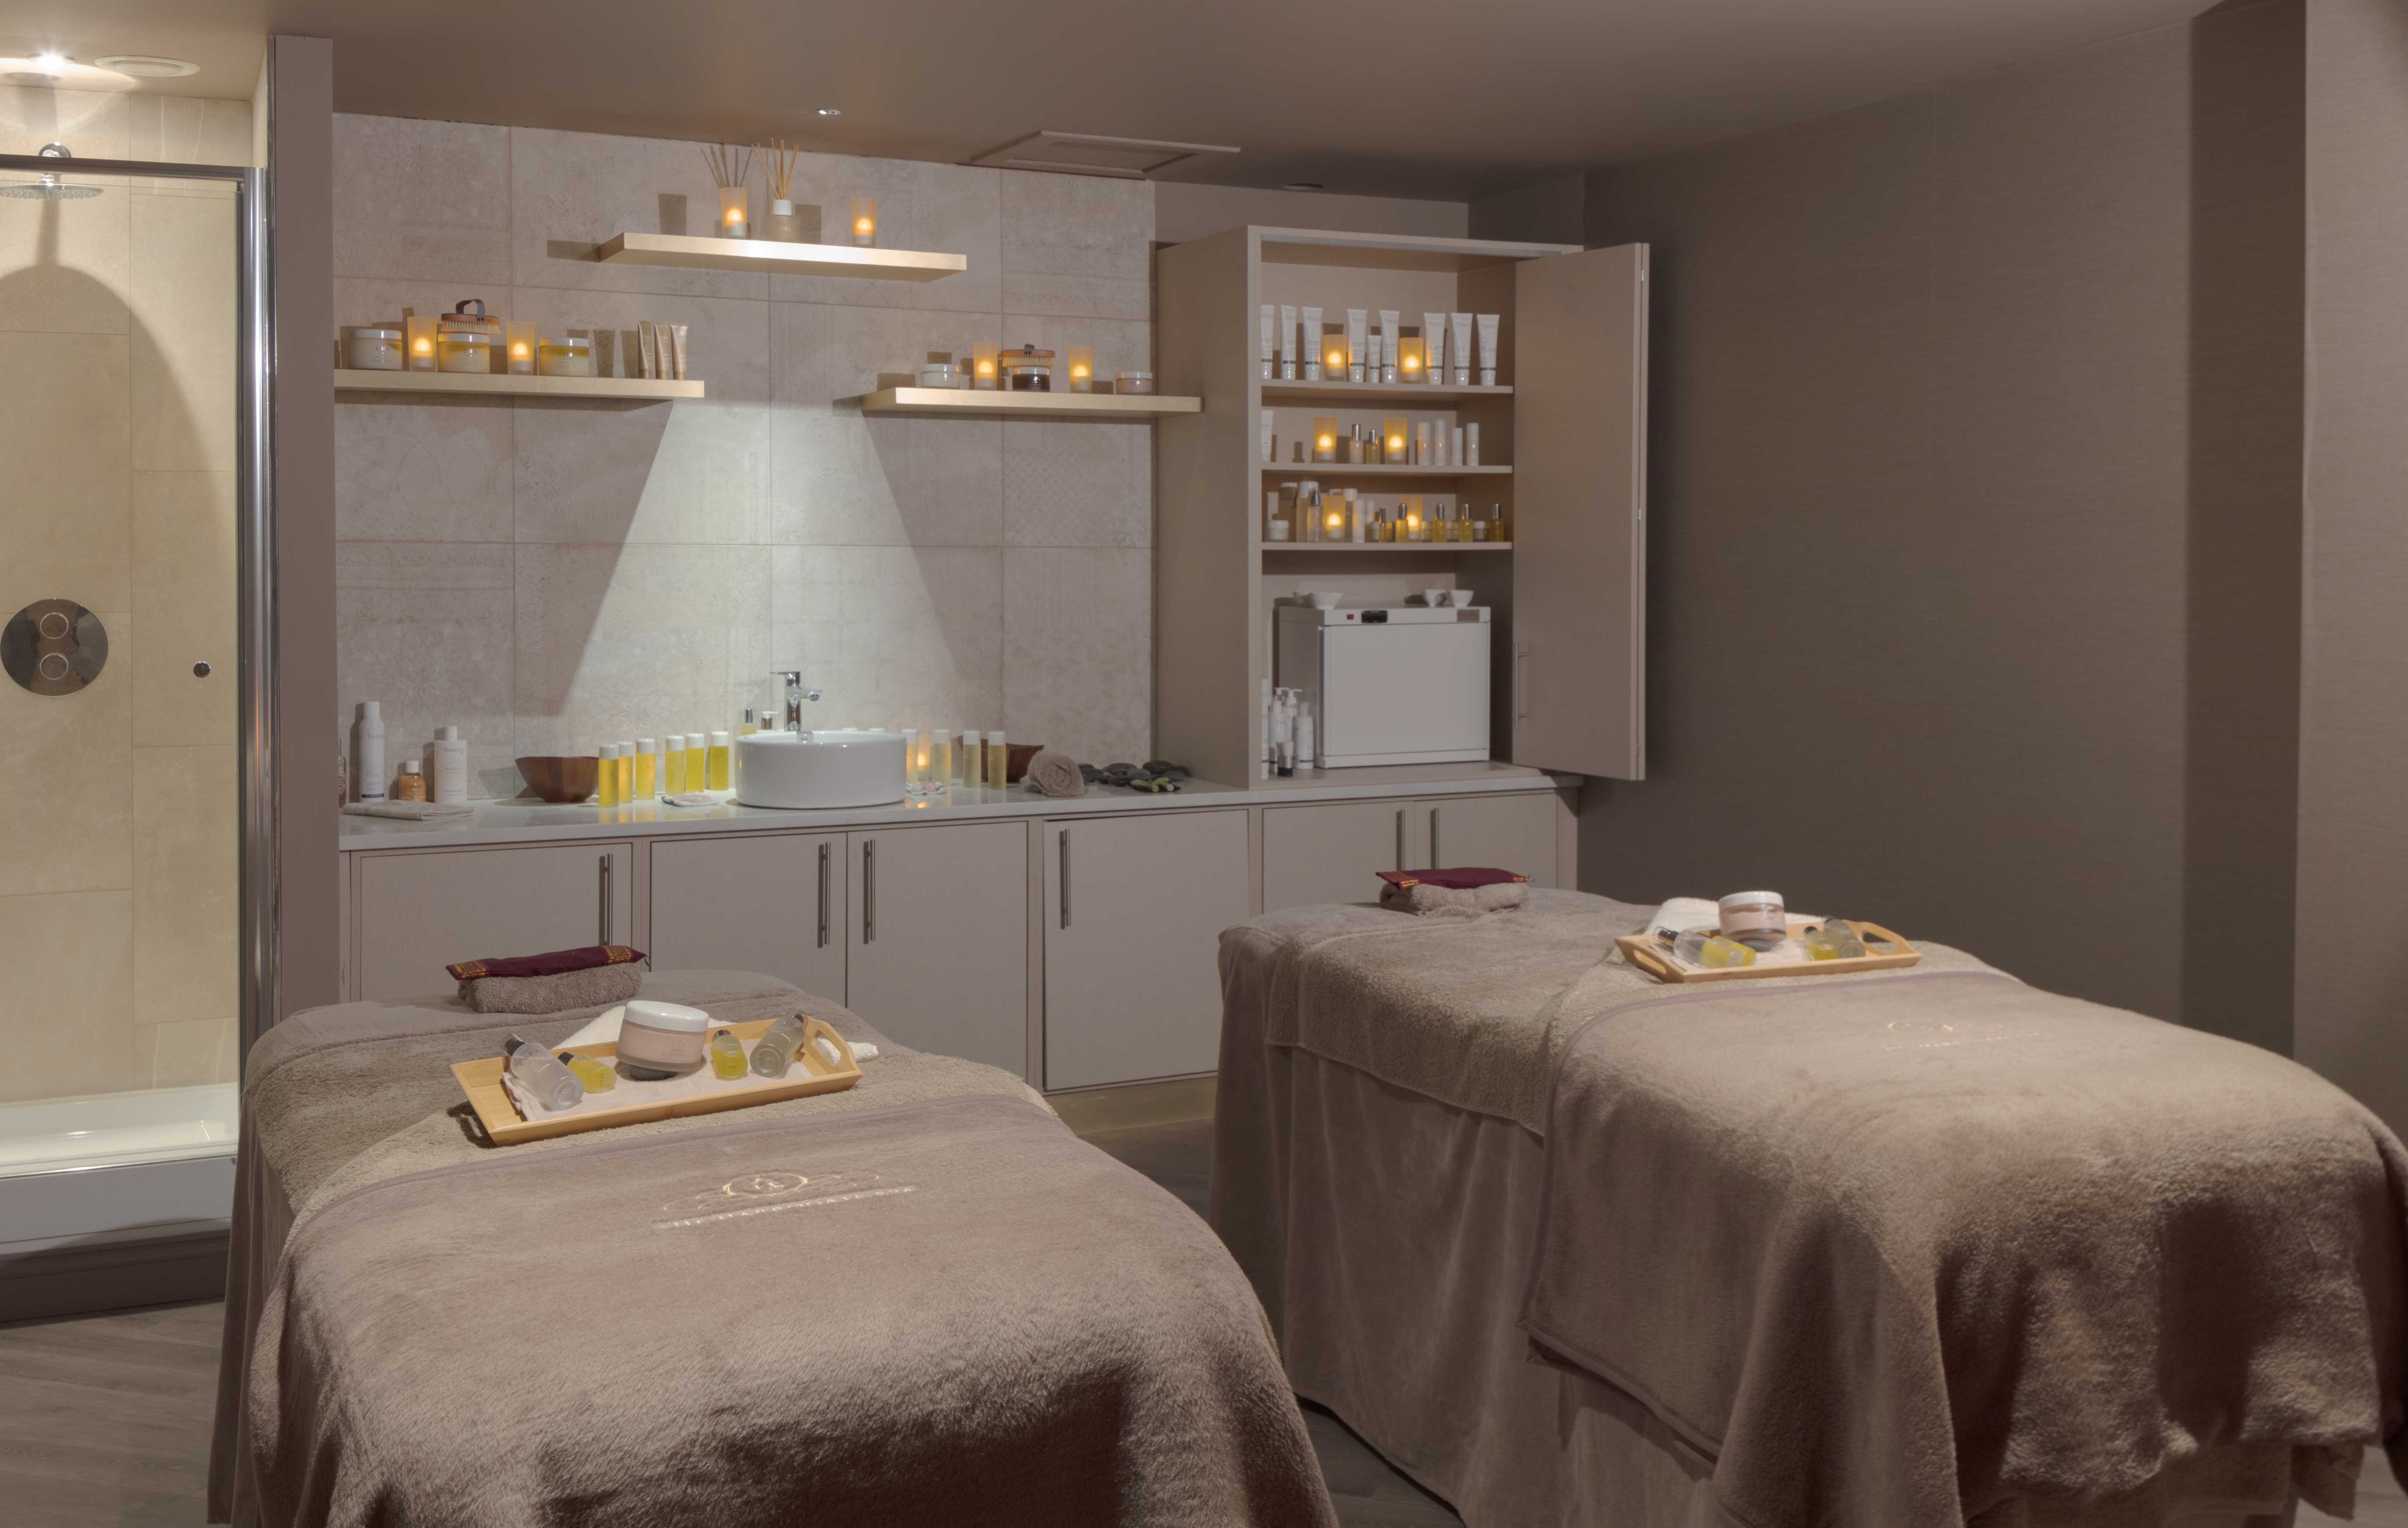 Morning Rasul Spa Day For Two, The Harrogate Spa At DoubleTree By Hilt